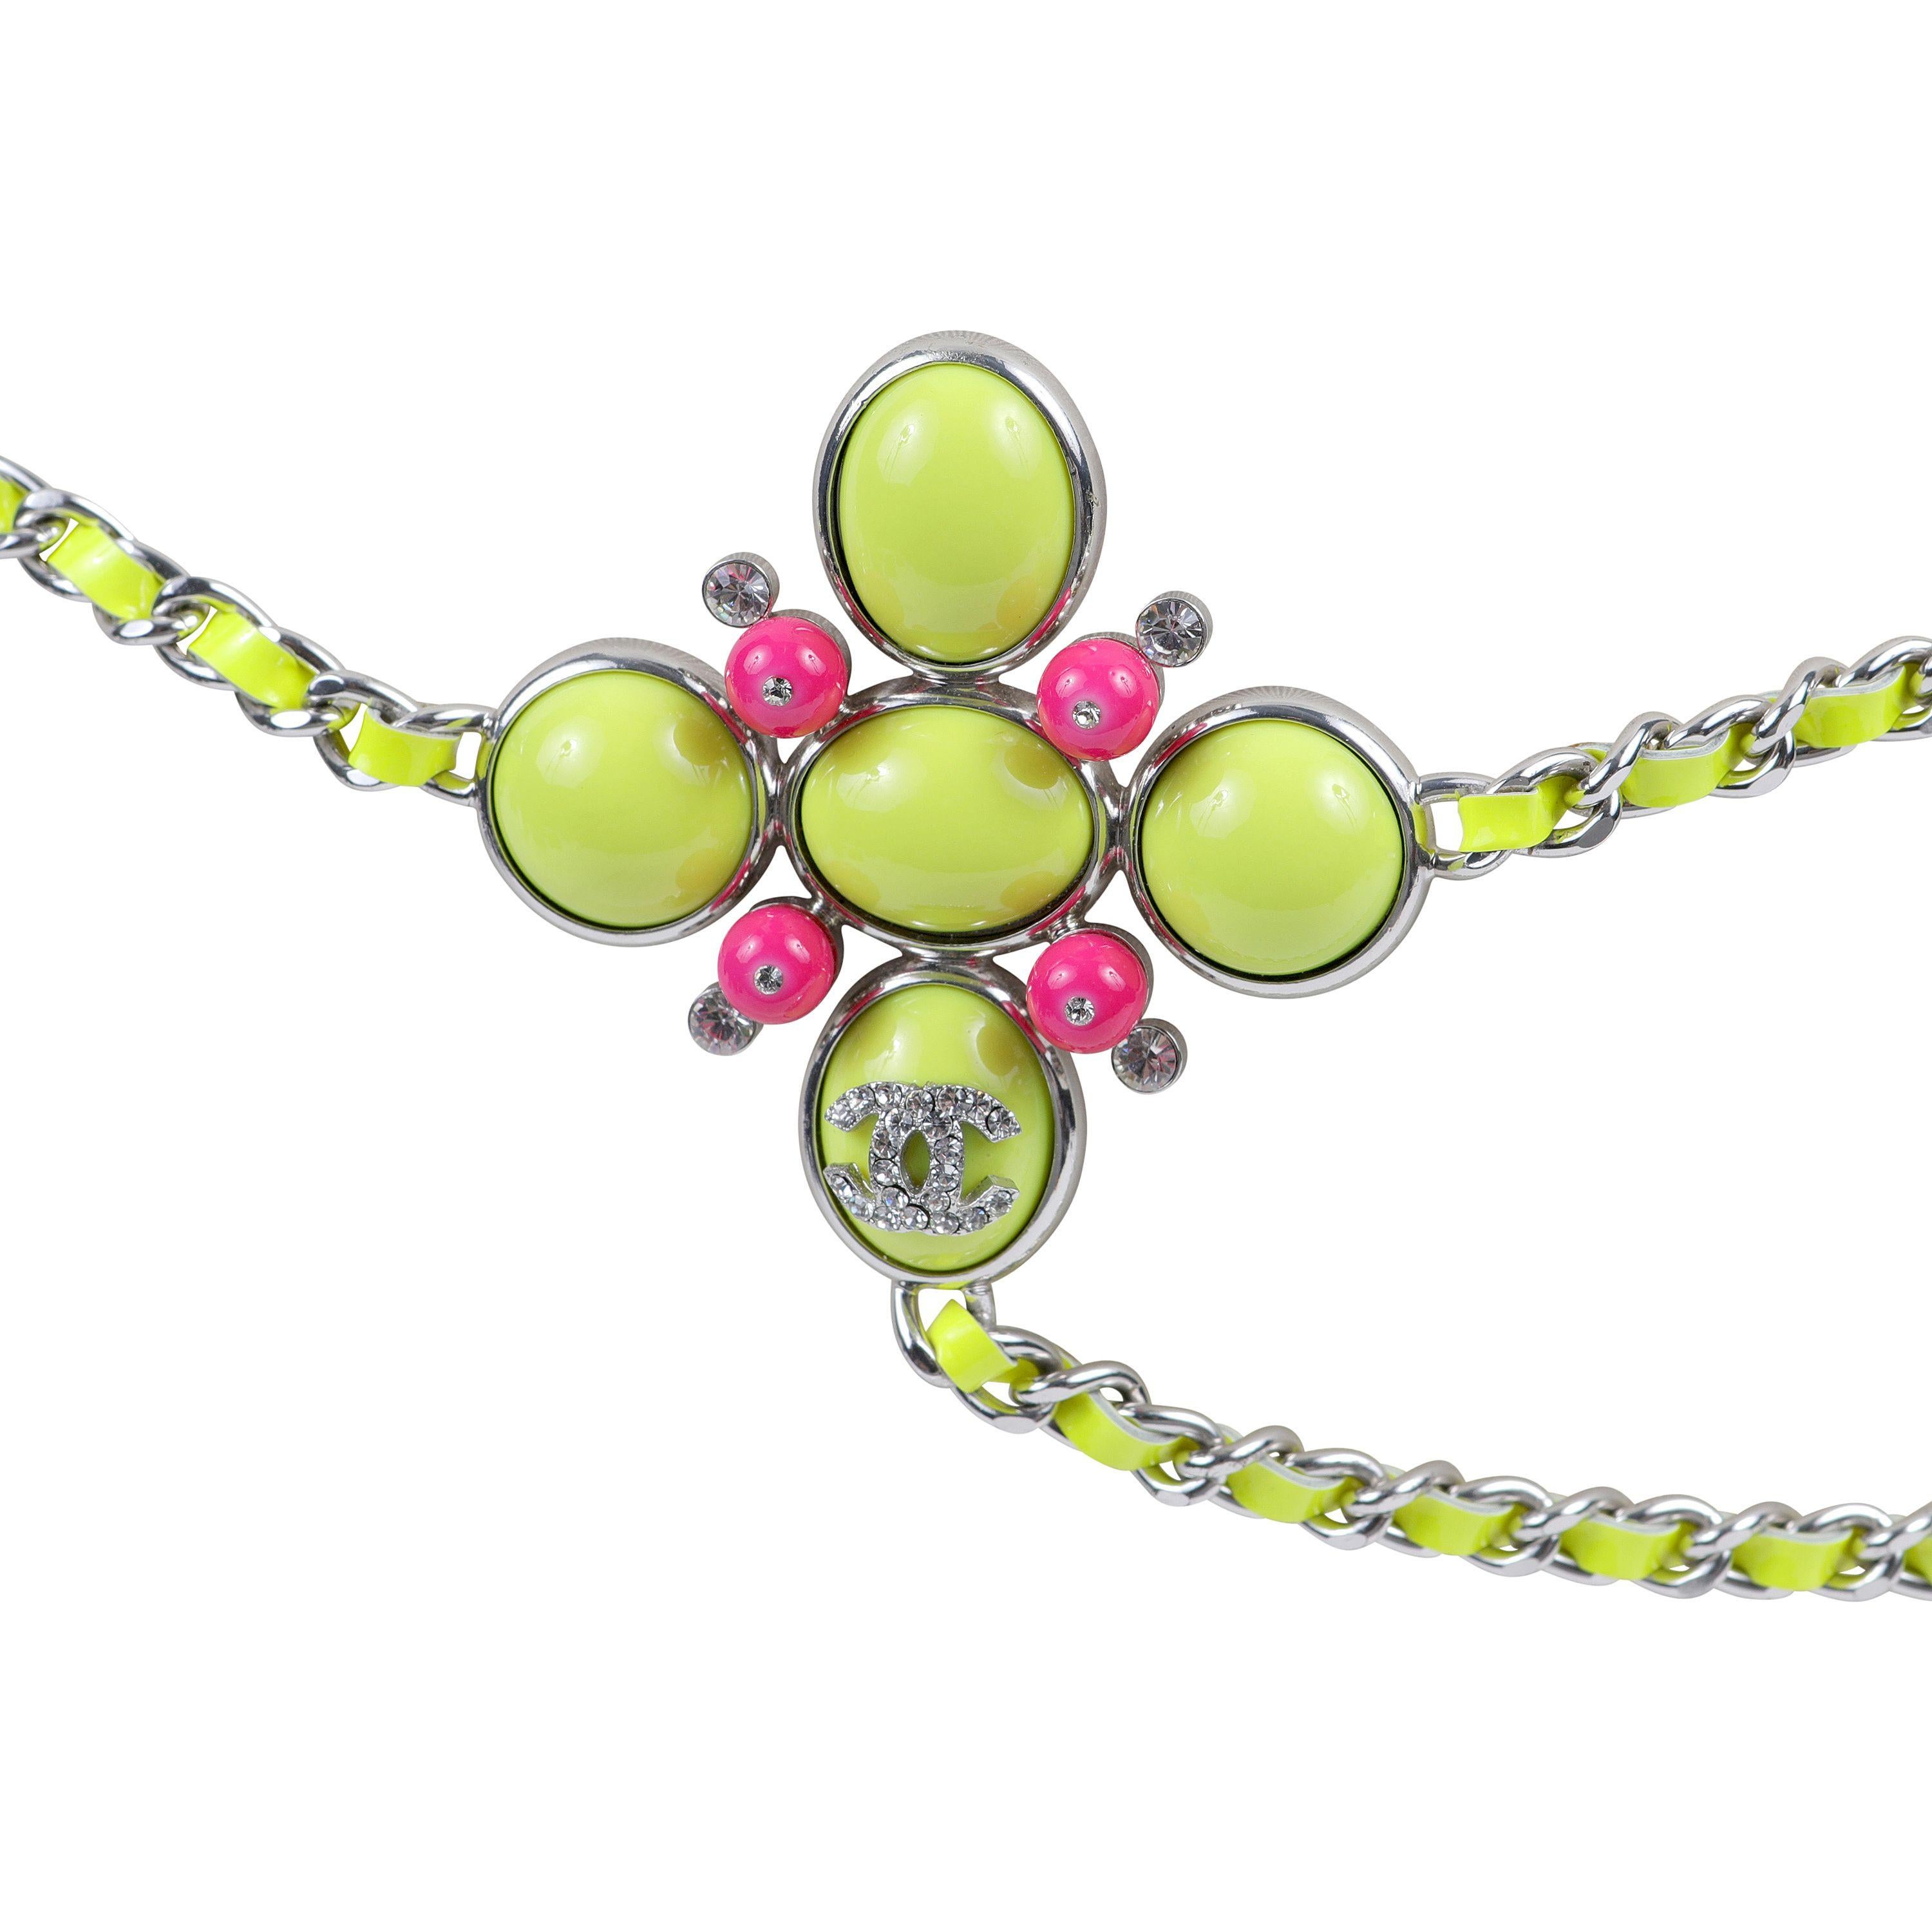 This authentic Chanel Chartreuse Green Patent Leather Chain Belt Necklace is pristine.  Nearly neon chartreuse green patent leather is entwined with silver chain.  Anchored with a resin “flower” brooch in green and vibrant pink with crystal CC.